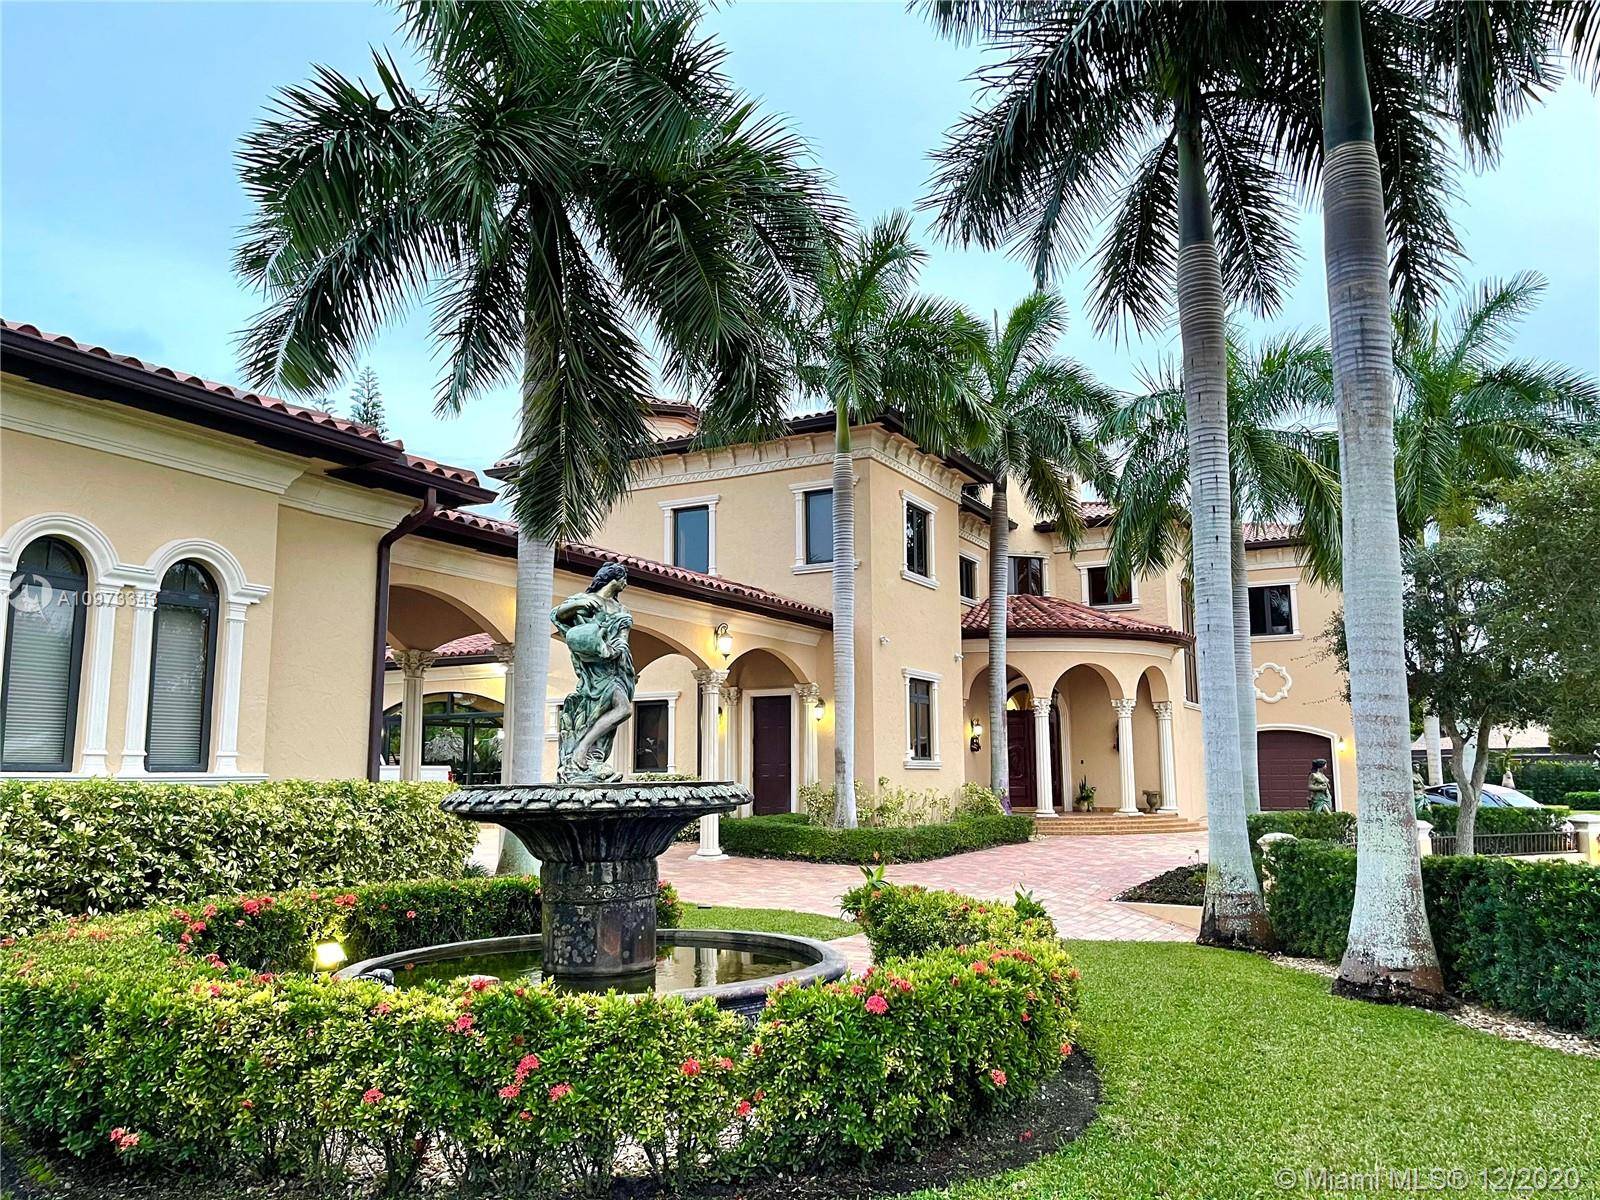 Beautiful 2 story Old Spanish Mediterranean style home located in the Palmetto Bay neighborhood of Miami, Florida featuring 6 bedrooms, movie room, 8 fullbaths, 1 halfbath.